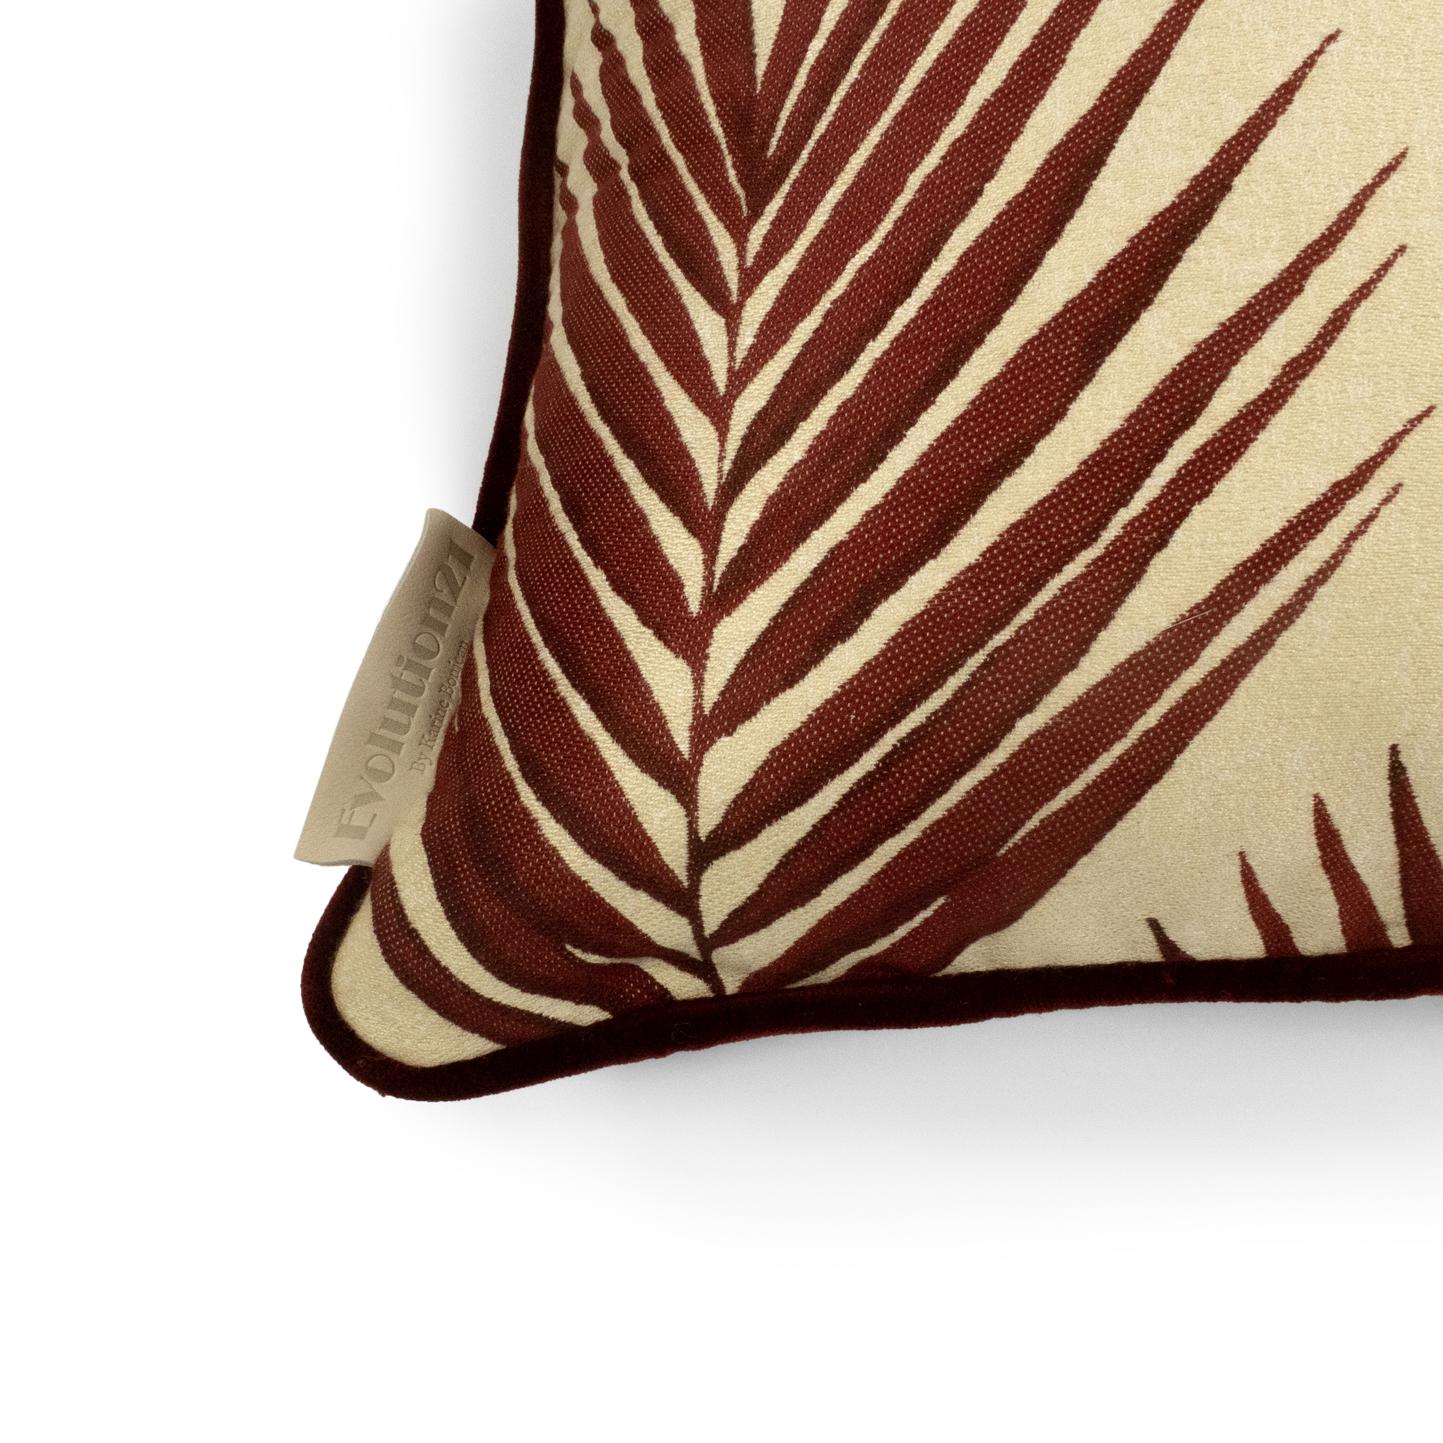 Belgian Cushion / Pillow Patterned Bamboo Leaf Red by Evolution21 For Sale